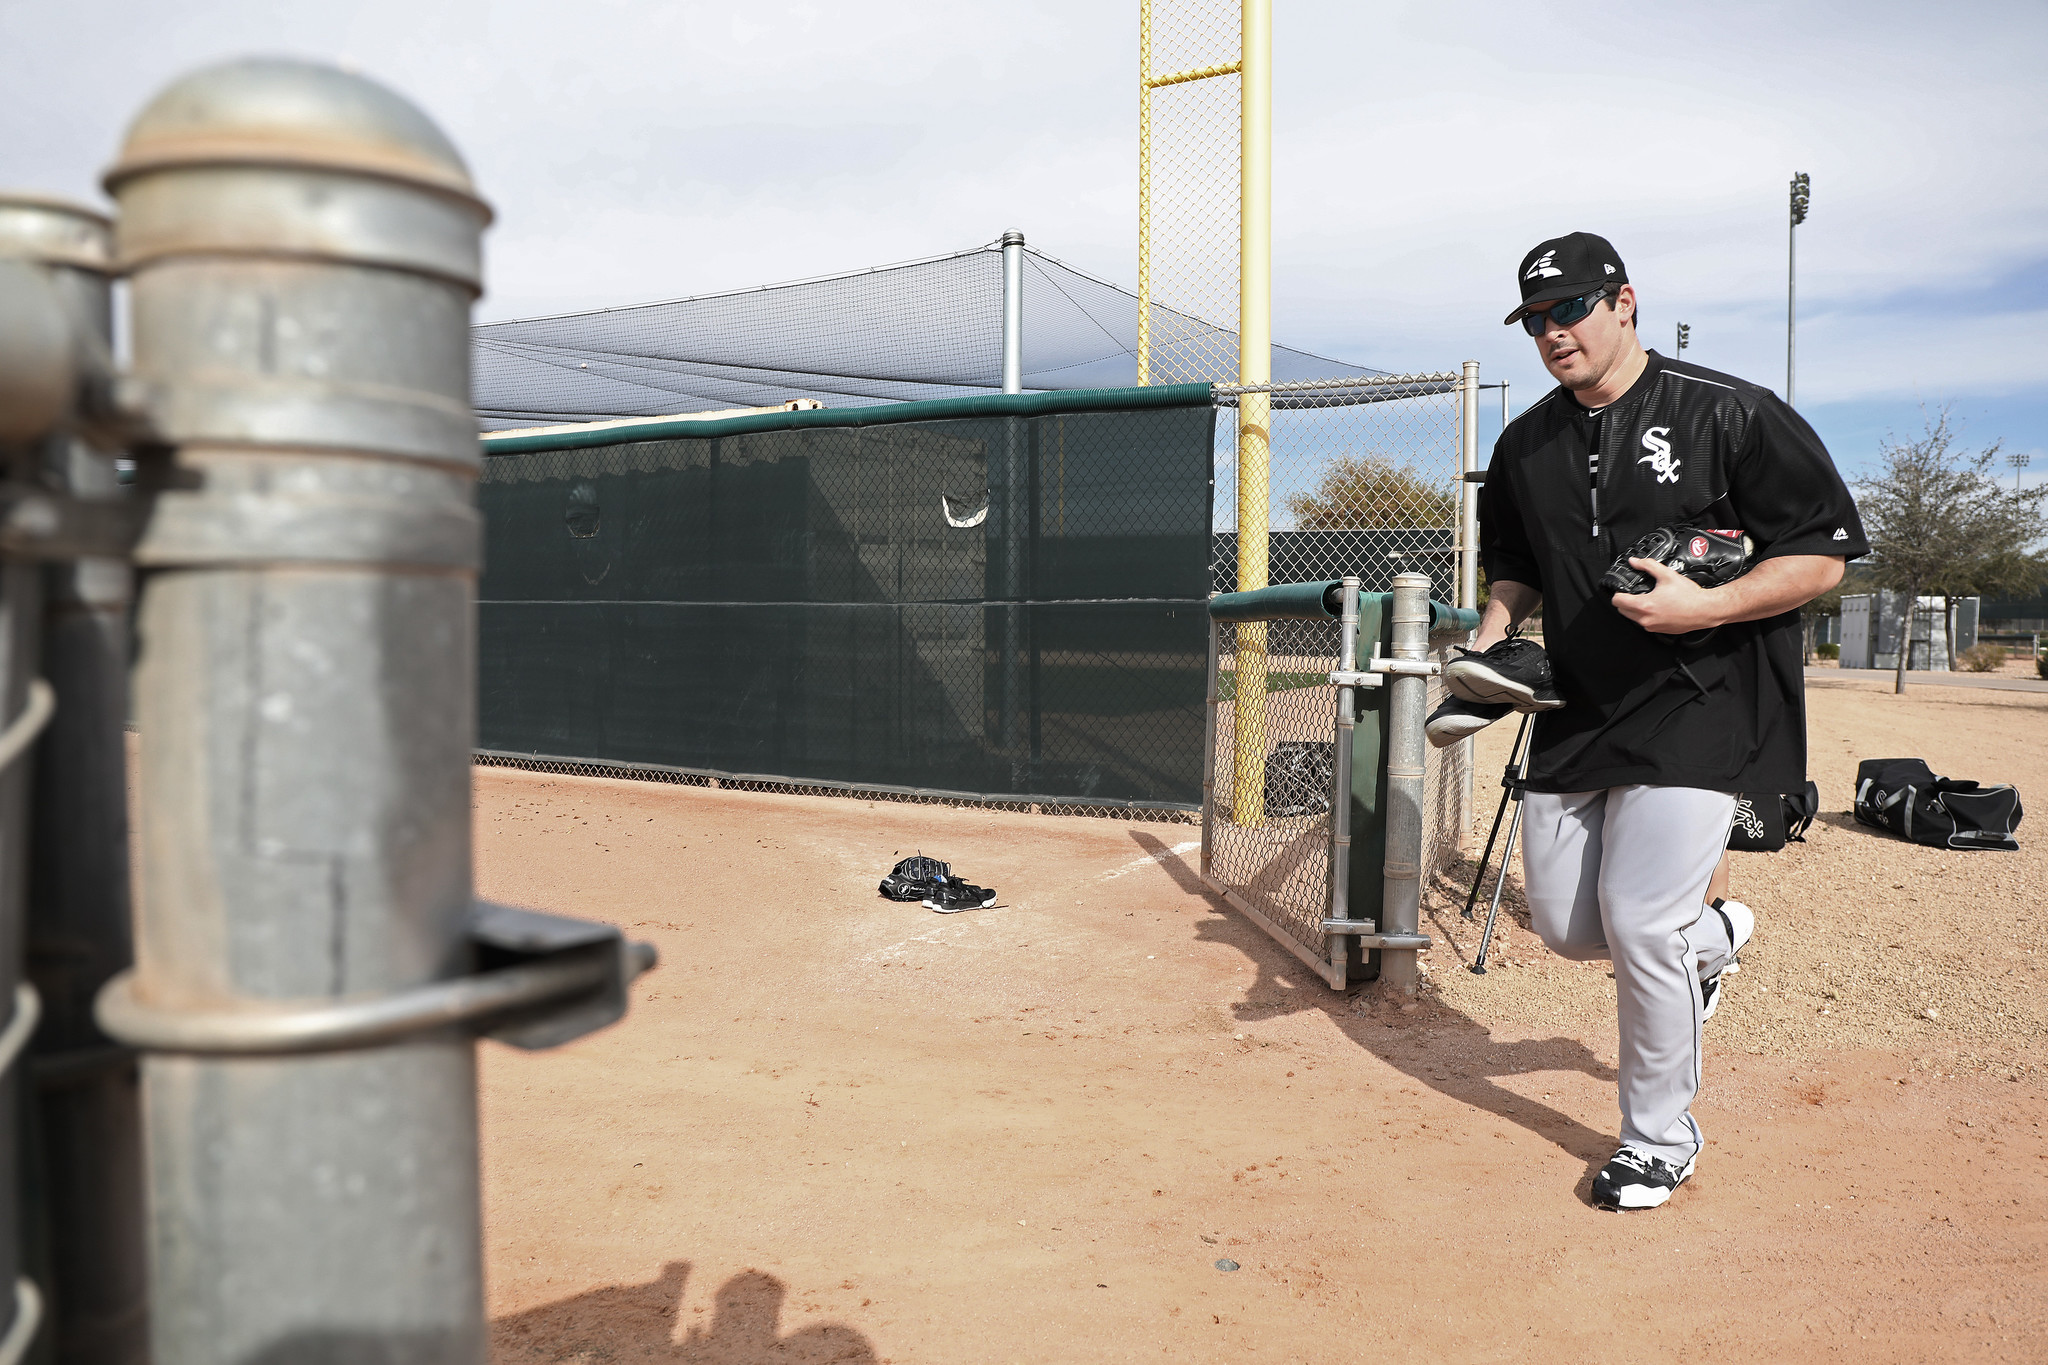 Injured pitcher Carlos Rodon hopes White Sox will 'lift the leash off' soon